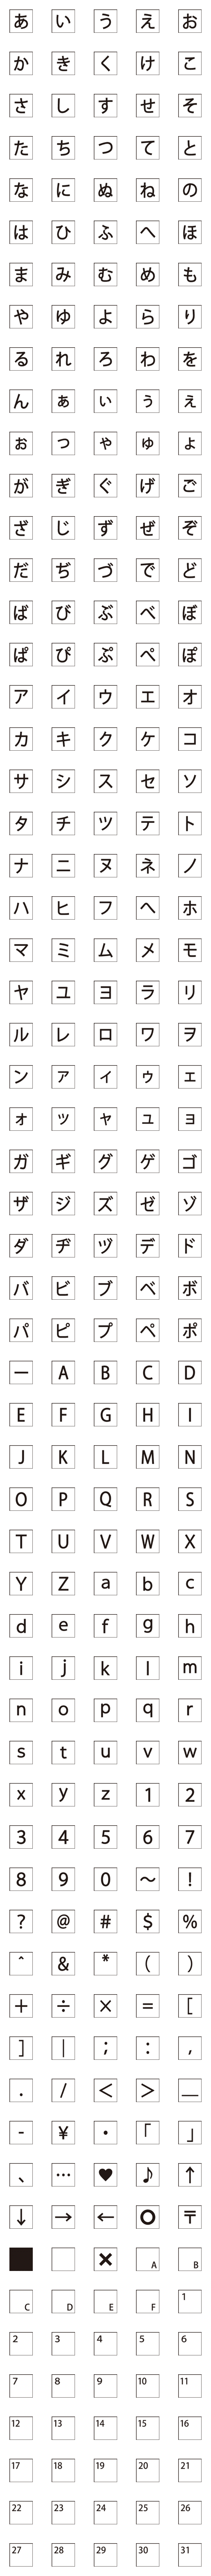 [LINE絵文字]クロスワードデコ文字 日付 ○×ゲームの画像一覧